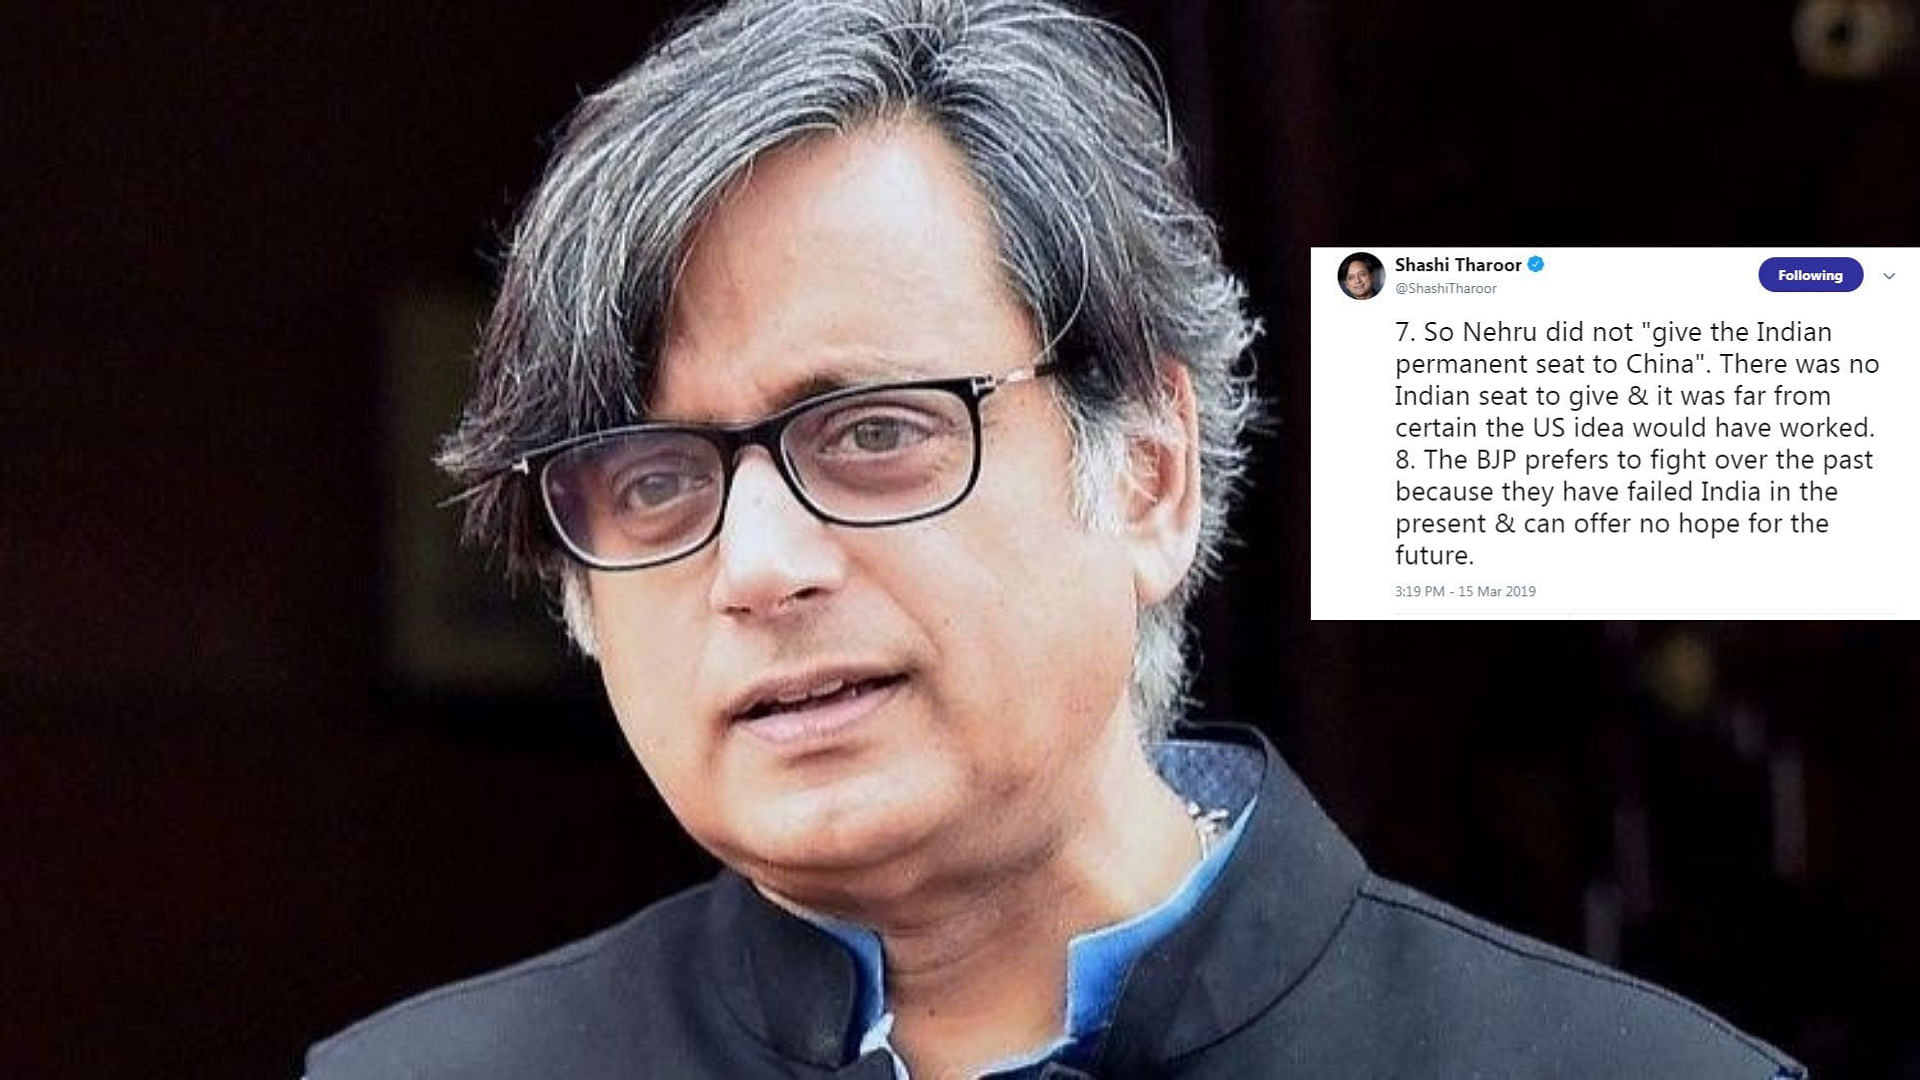 Shashi Tharoor also took a dig at the BJP, saying it “prefers to fight over the past because they have failed India in the present and can offer no hope for the future”&nbsp;